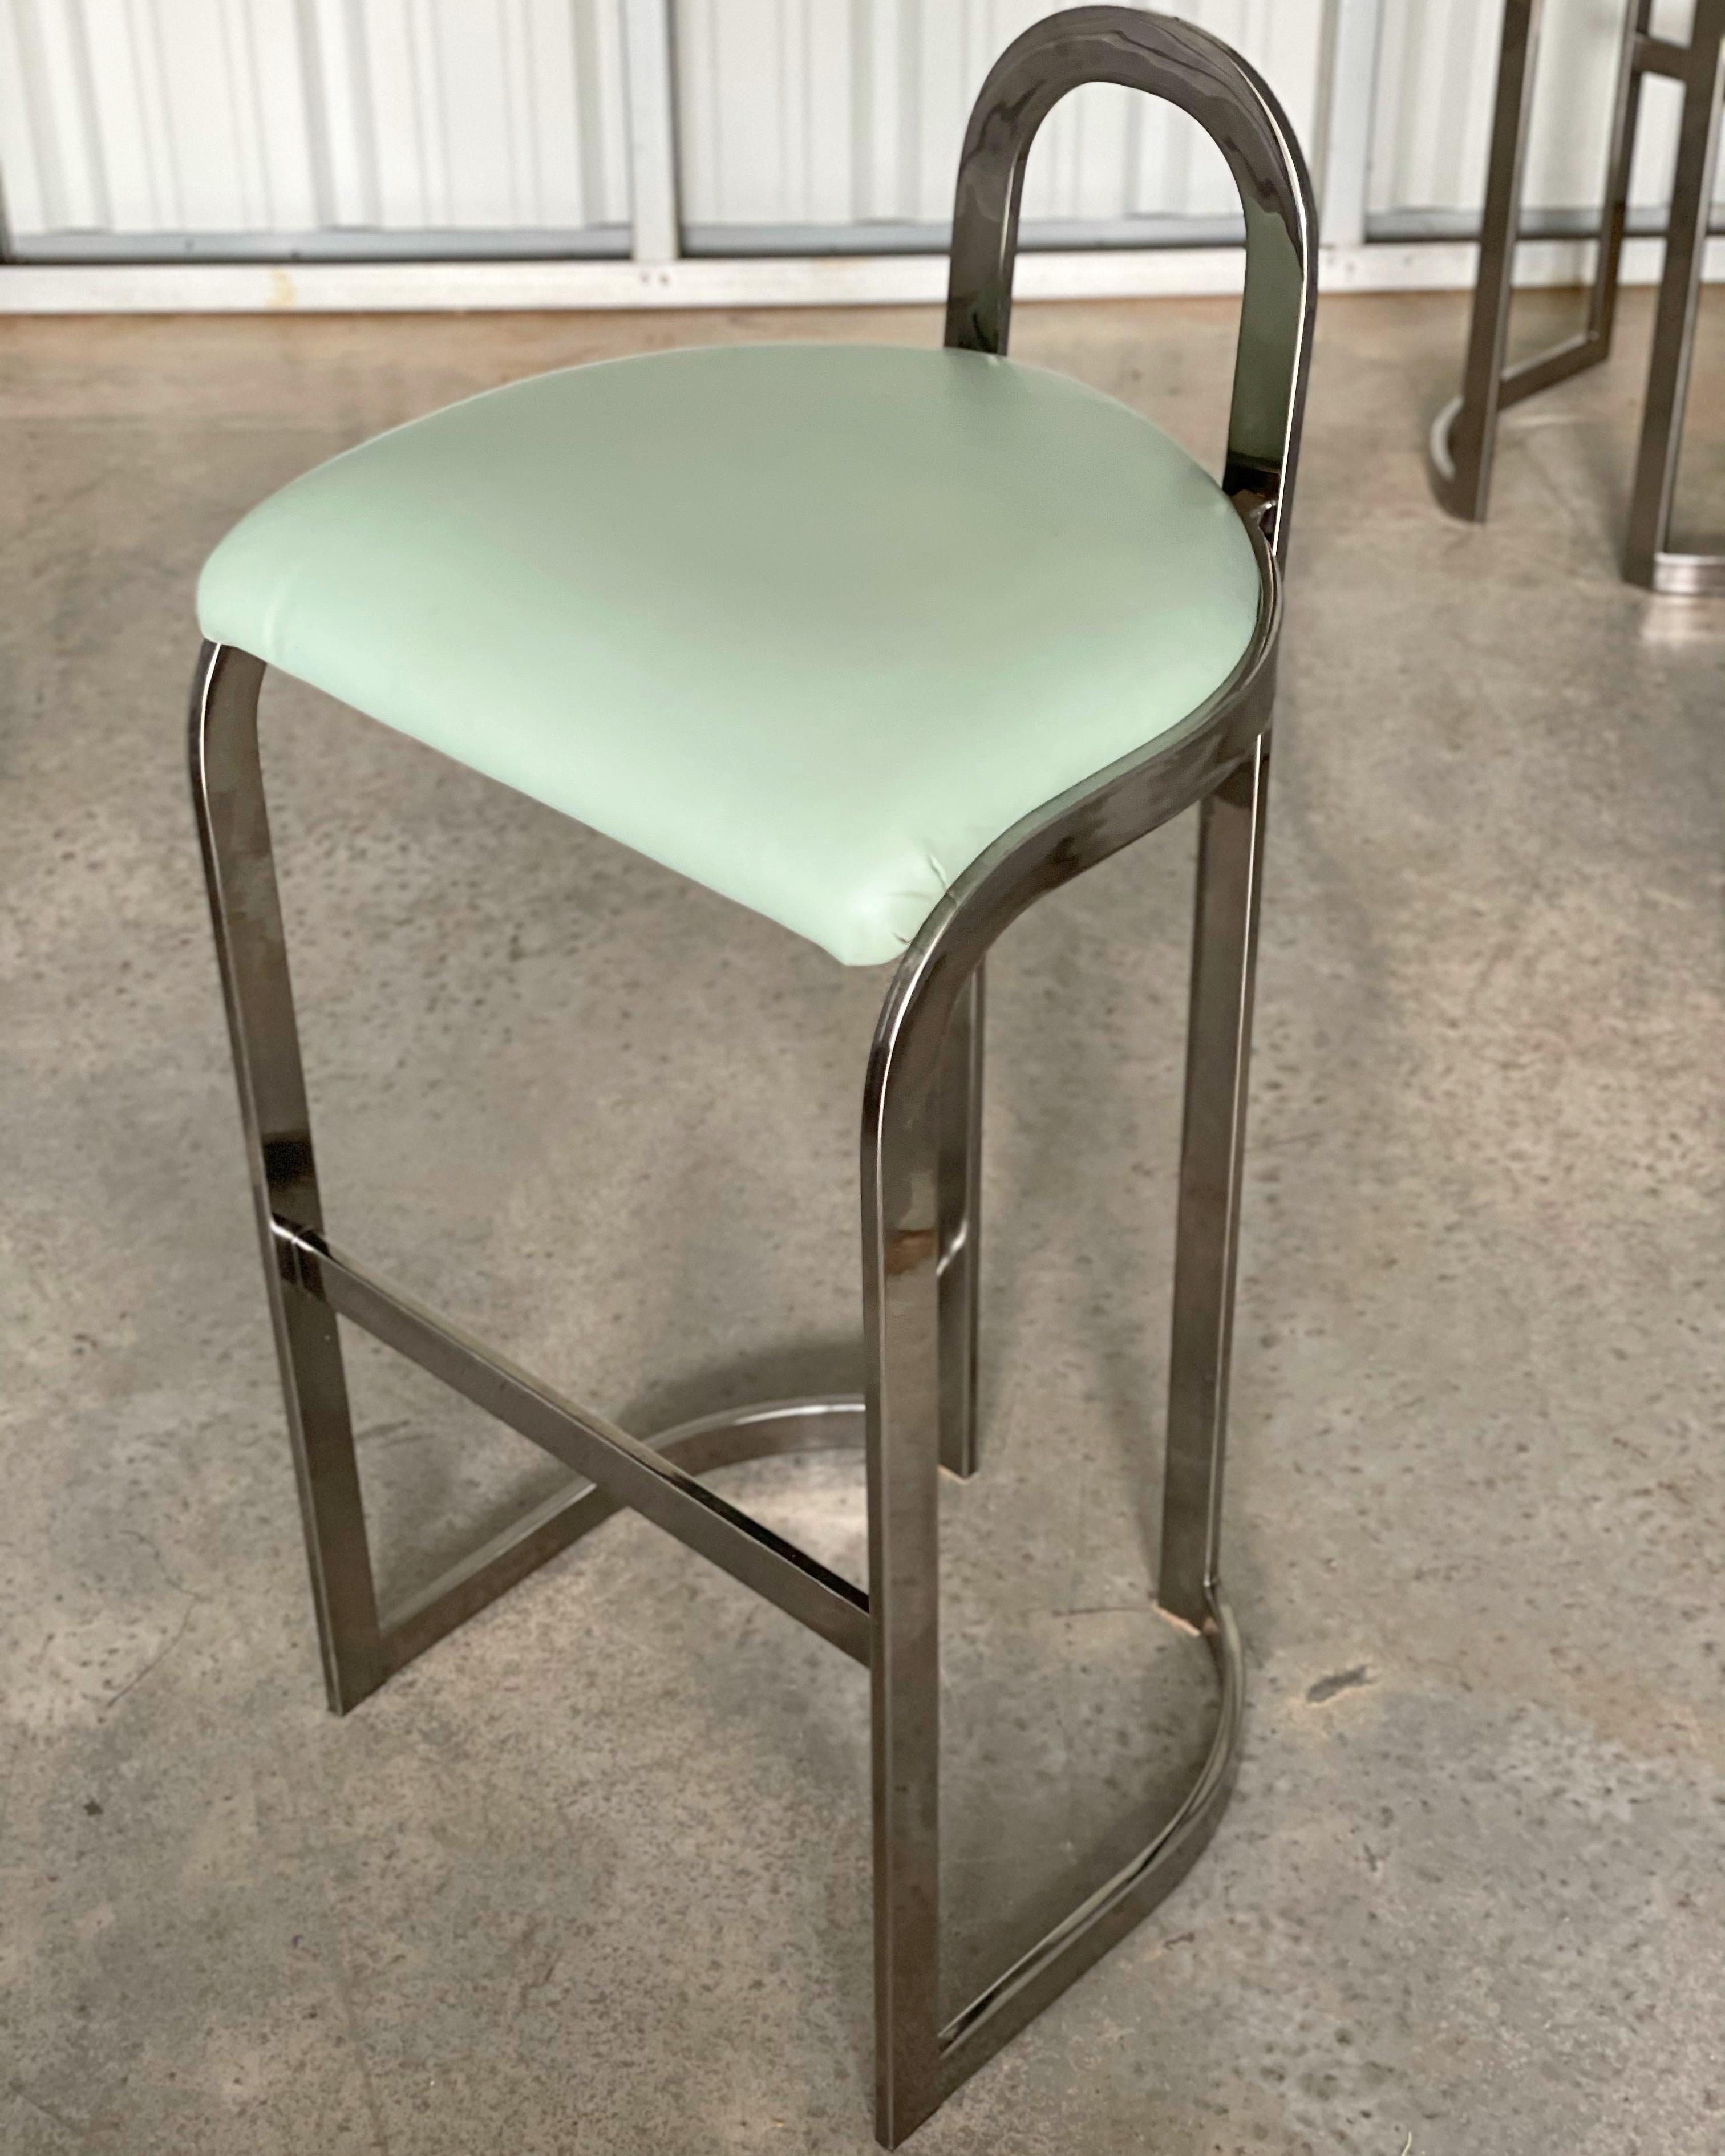 Late 20th Century Pierre Cardin Bar Stools Set of Four Midcentury Style Chrome Bar Height Stools